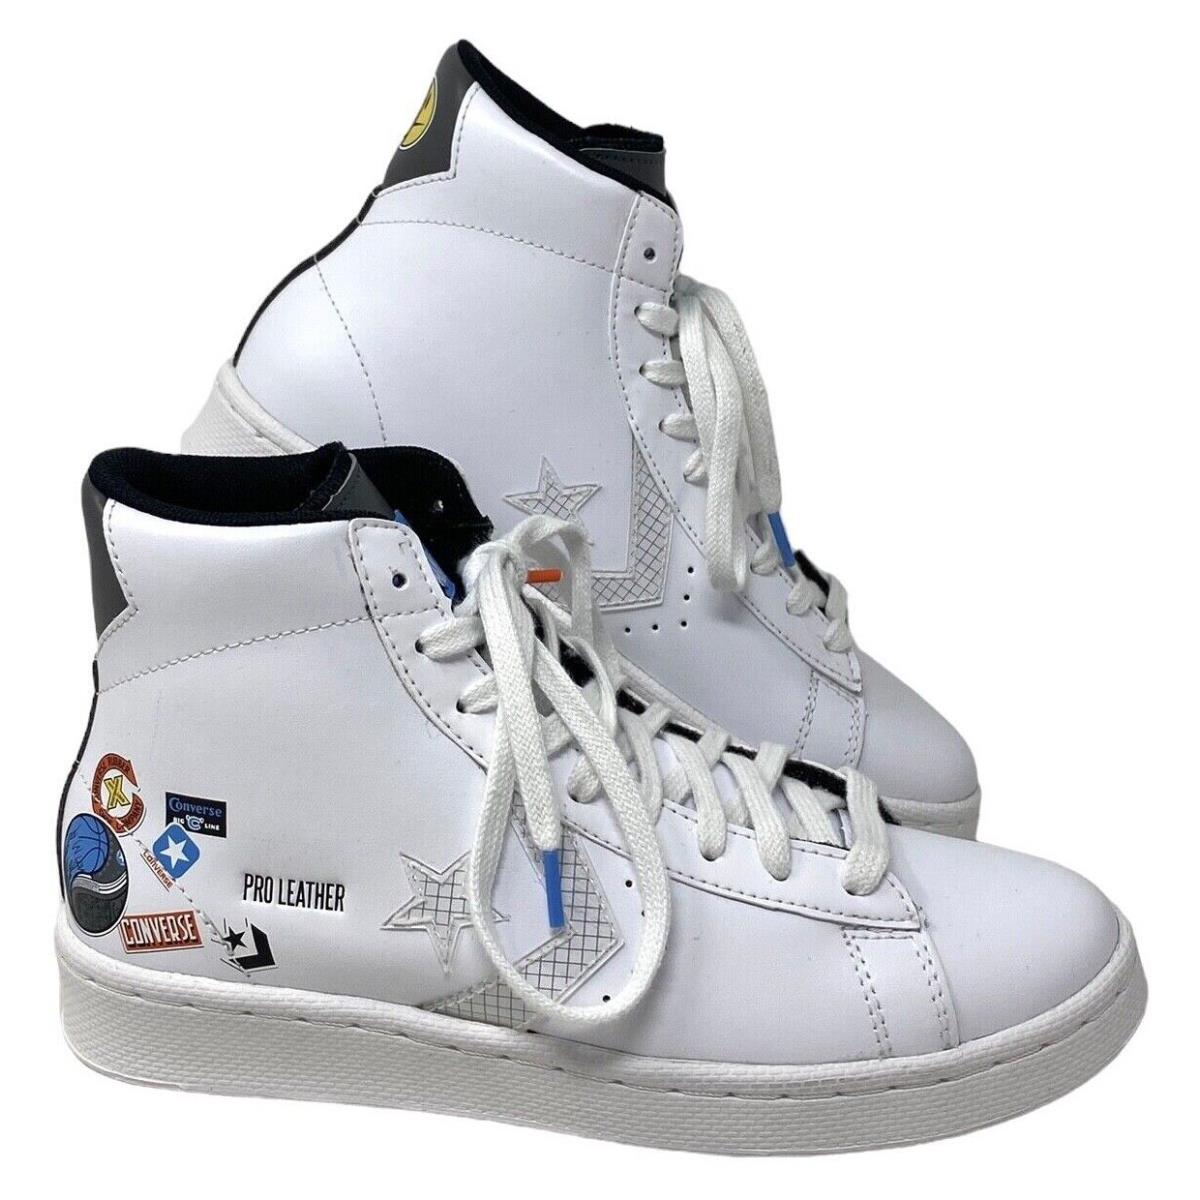 Converse Pro Leather High White Multi Skate Shoes Kids Women`s Sneakers 272446C